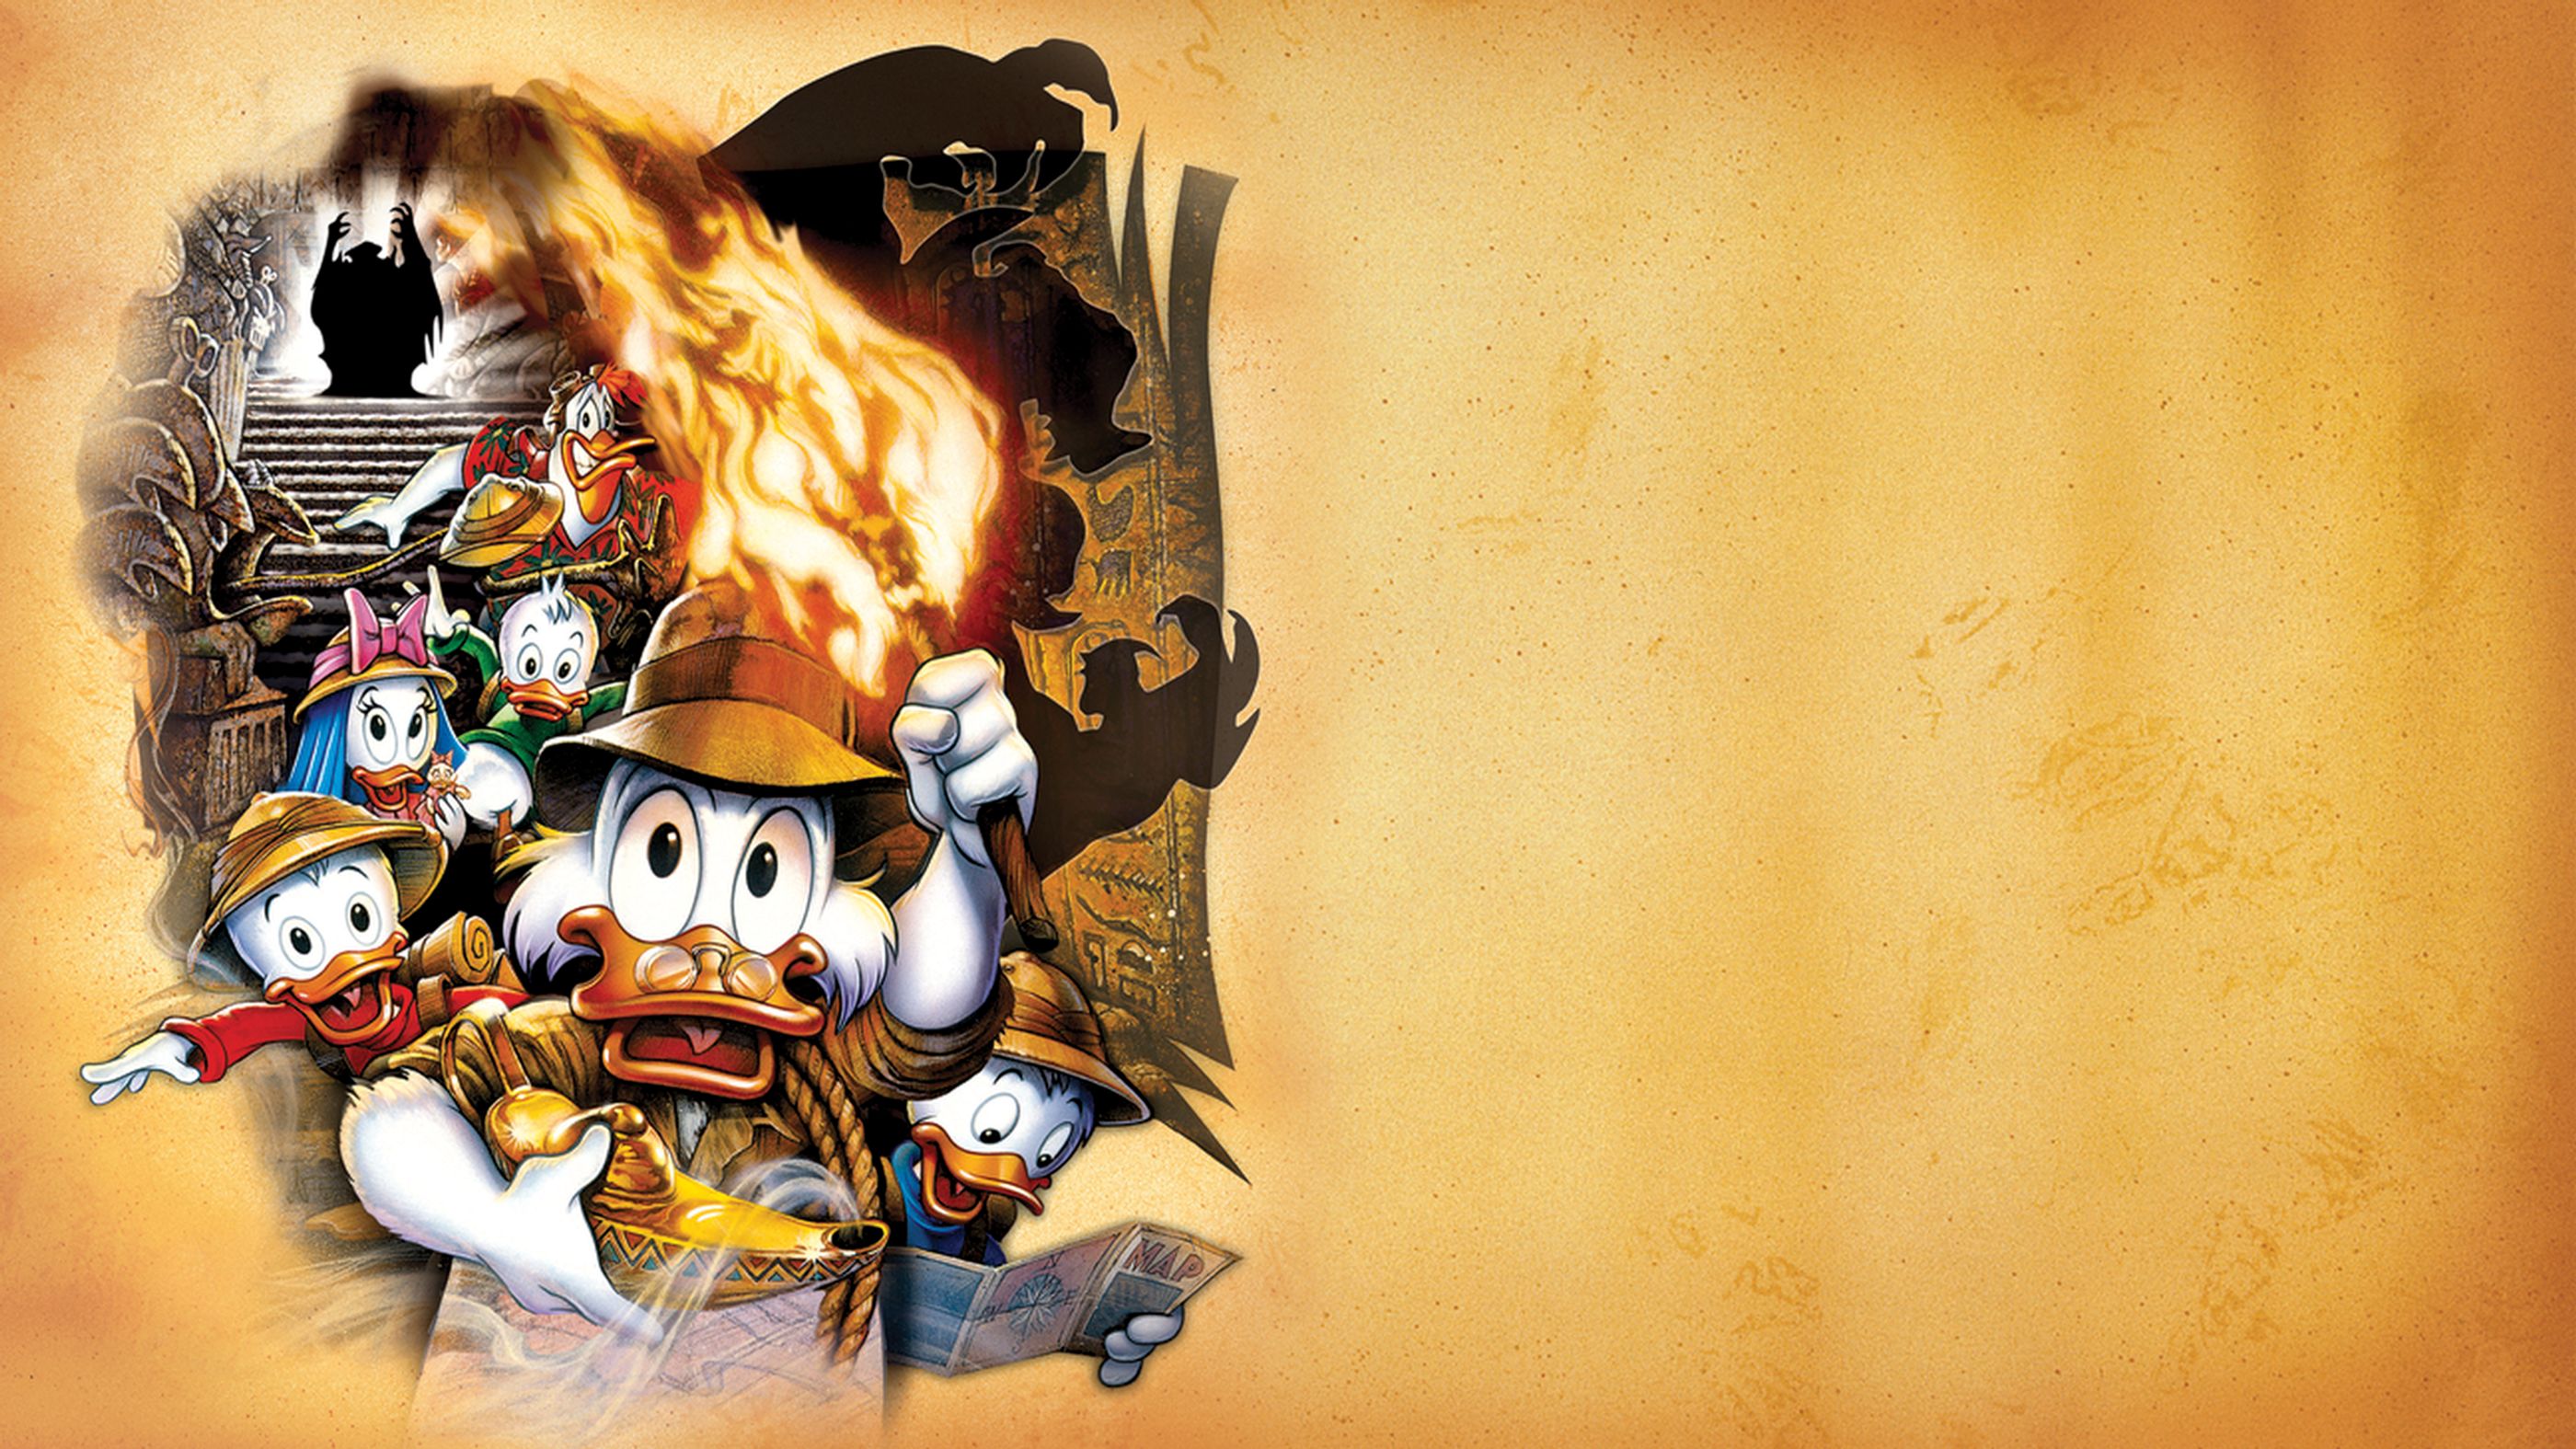 Ducktales the Movie: Treasure of the Lost Lamp | Movies Anywhere